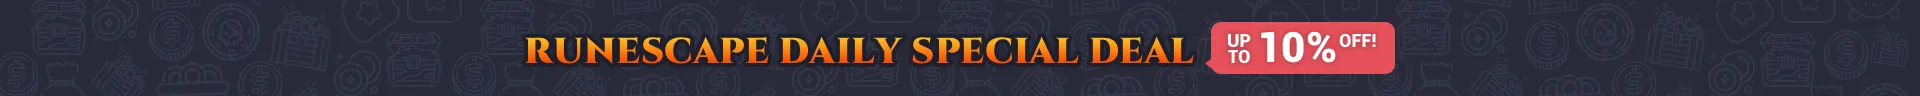 RUNESCAPE DAILY SPECIAL DEAL